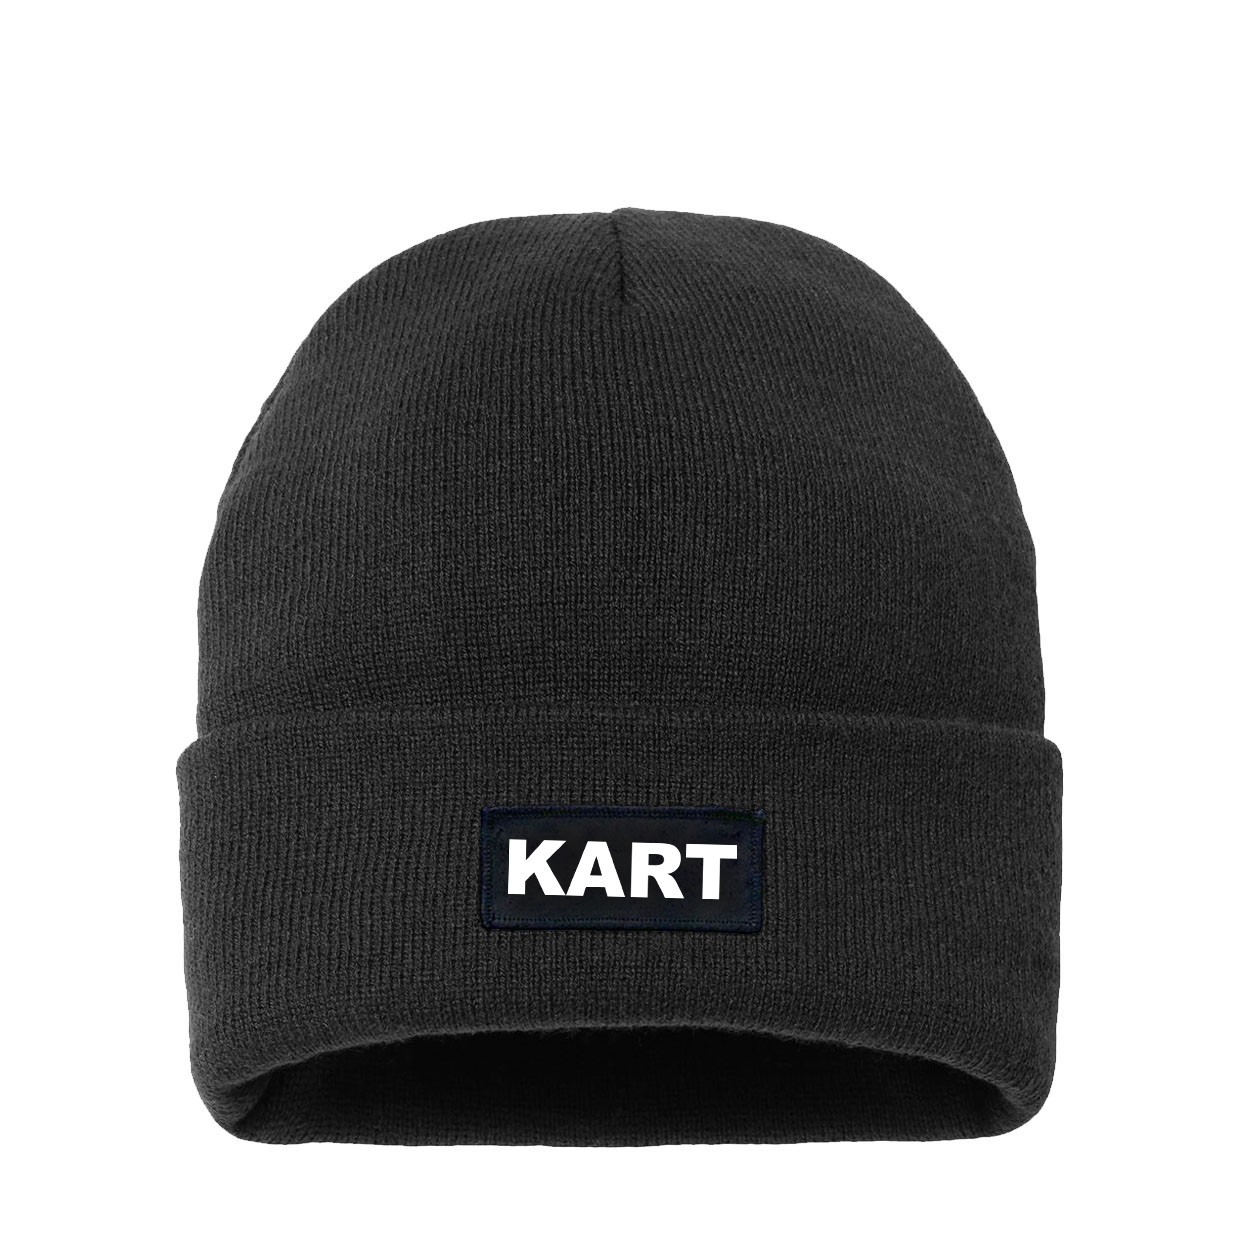 Kart Brand Logo Night Out Woven Patch Night Out Sherpa Lined Cuffed Beanie Black